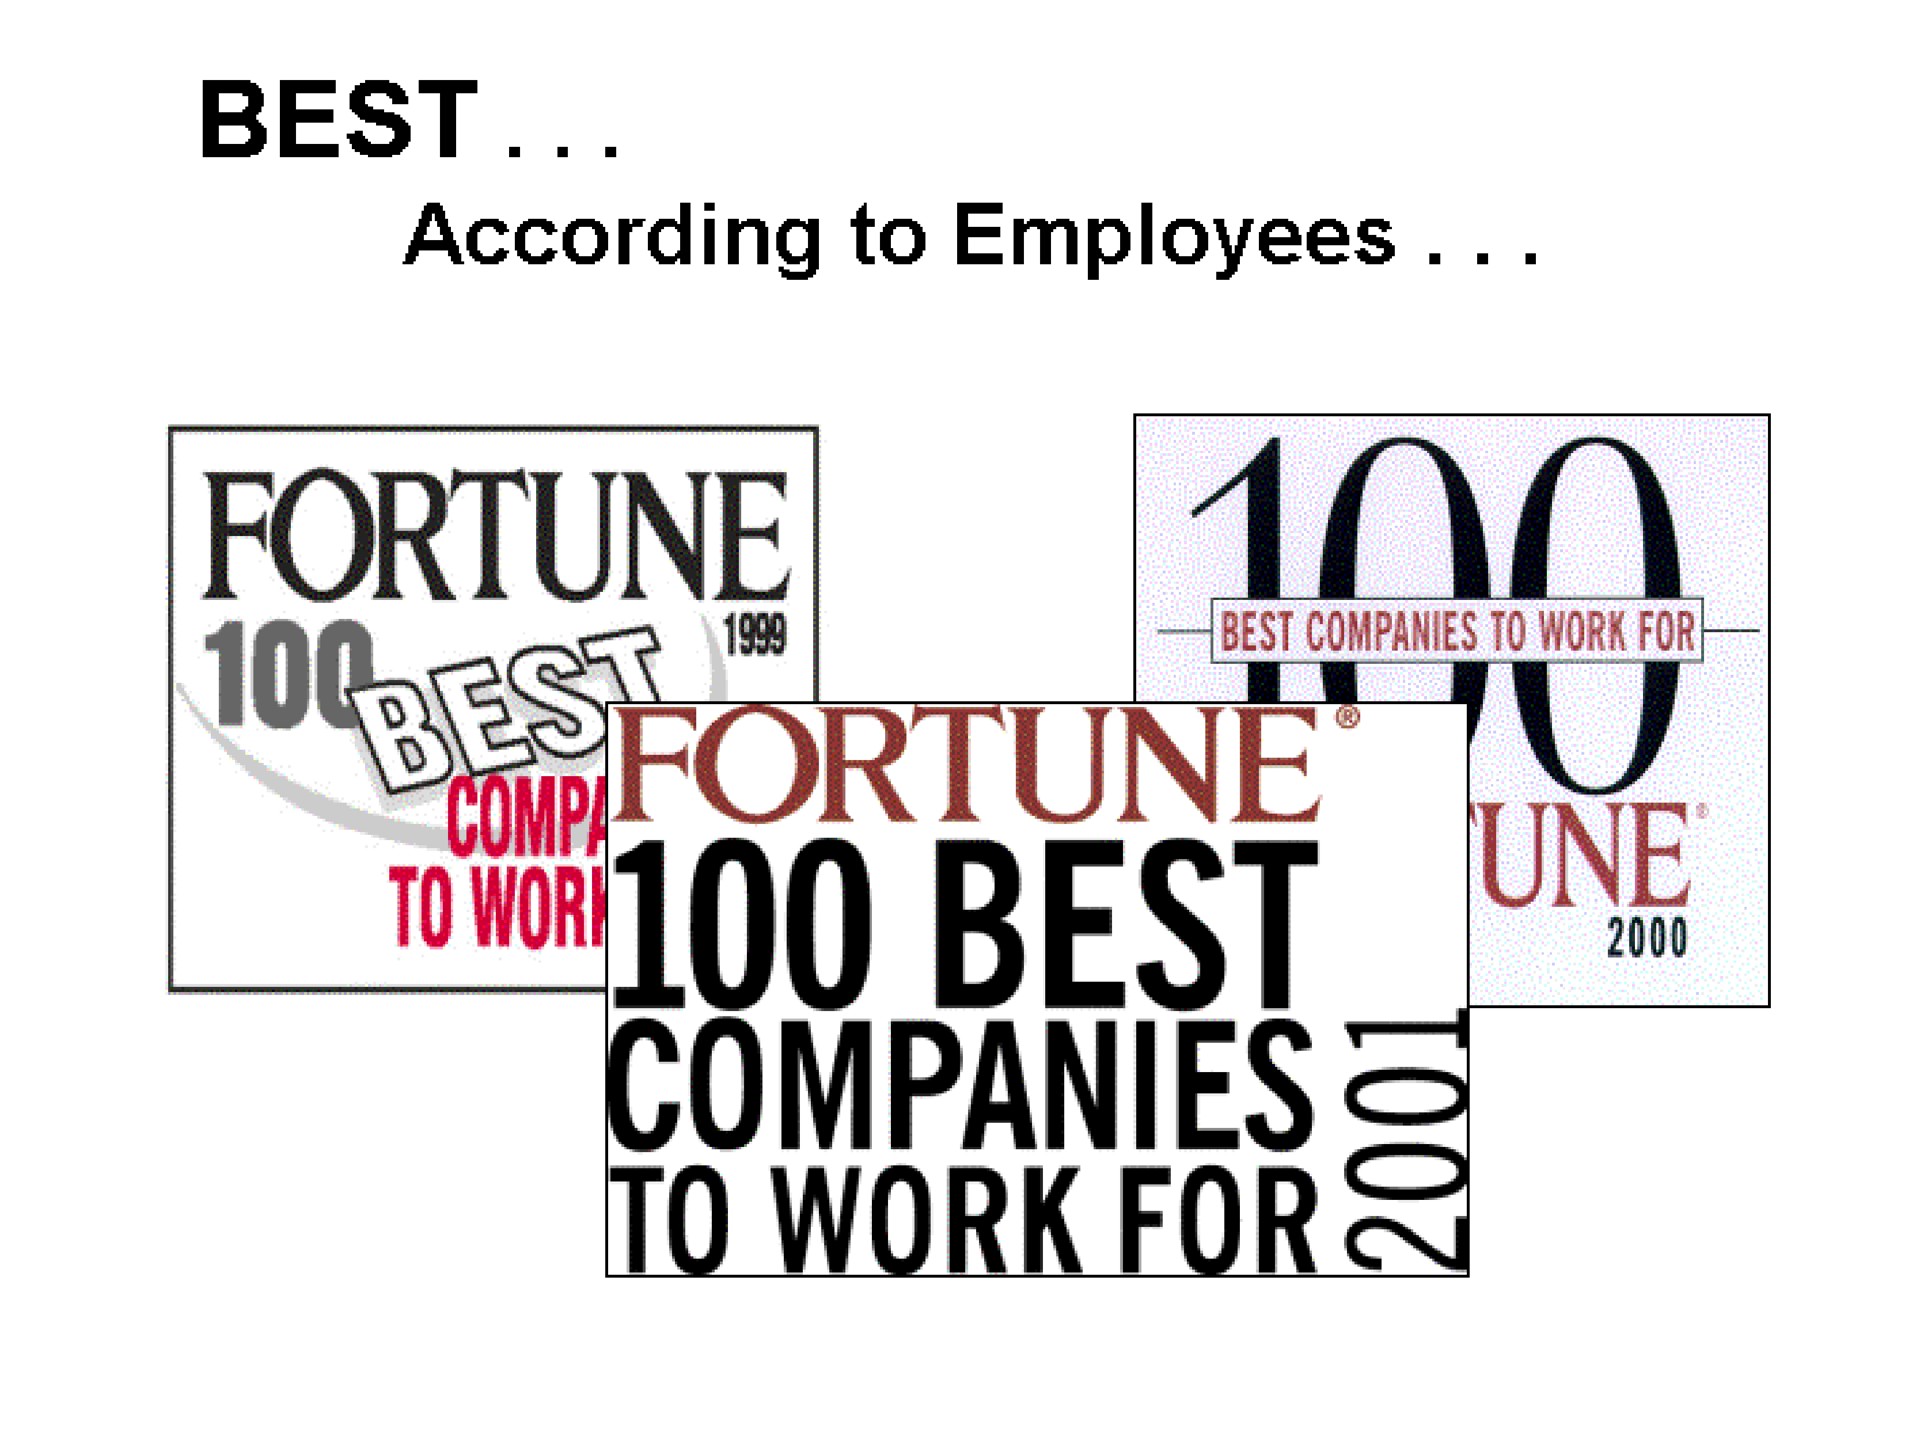 best according to employees | Continental Airlines